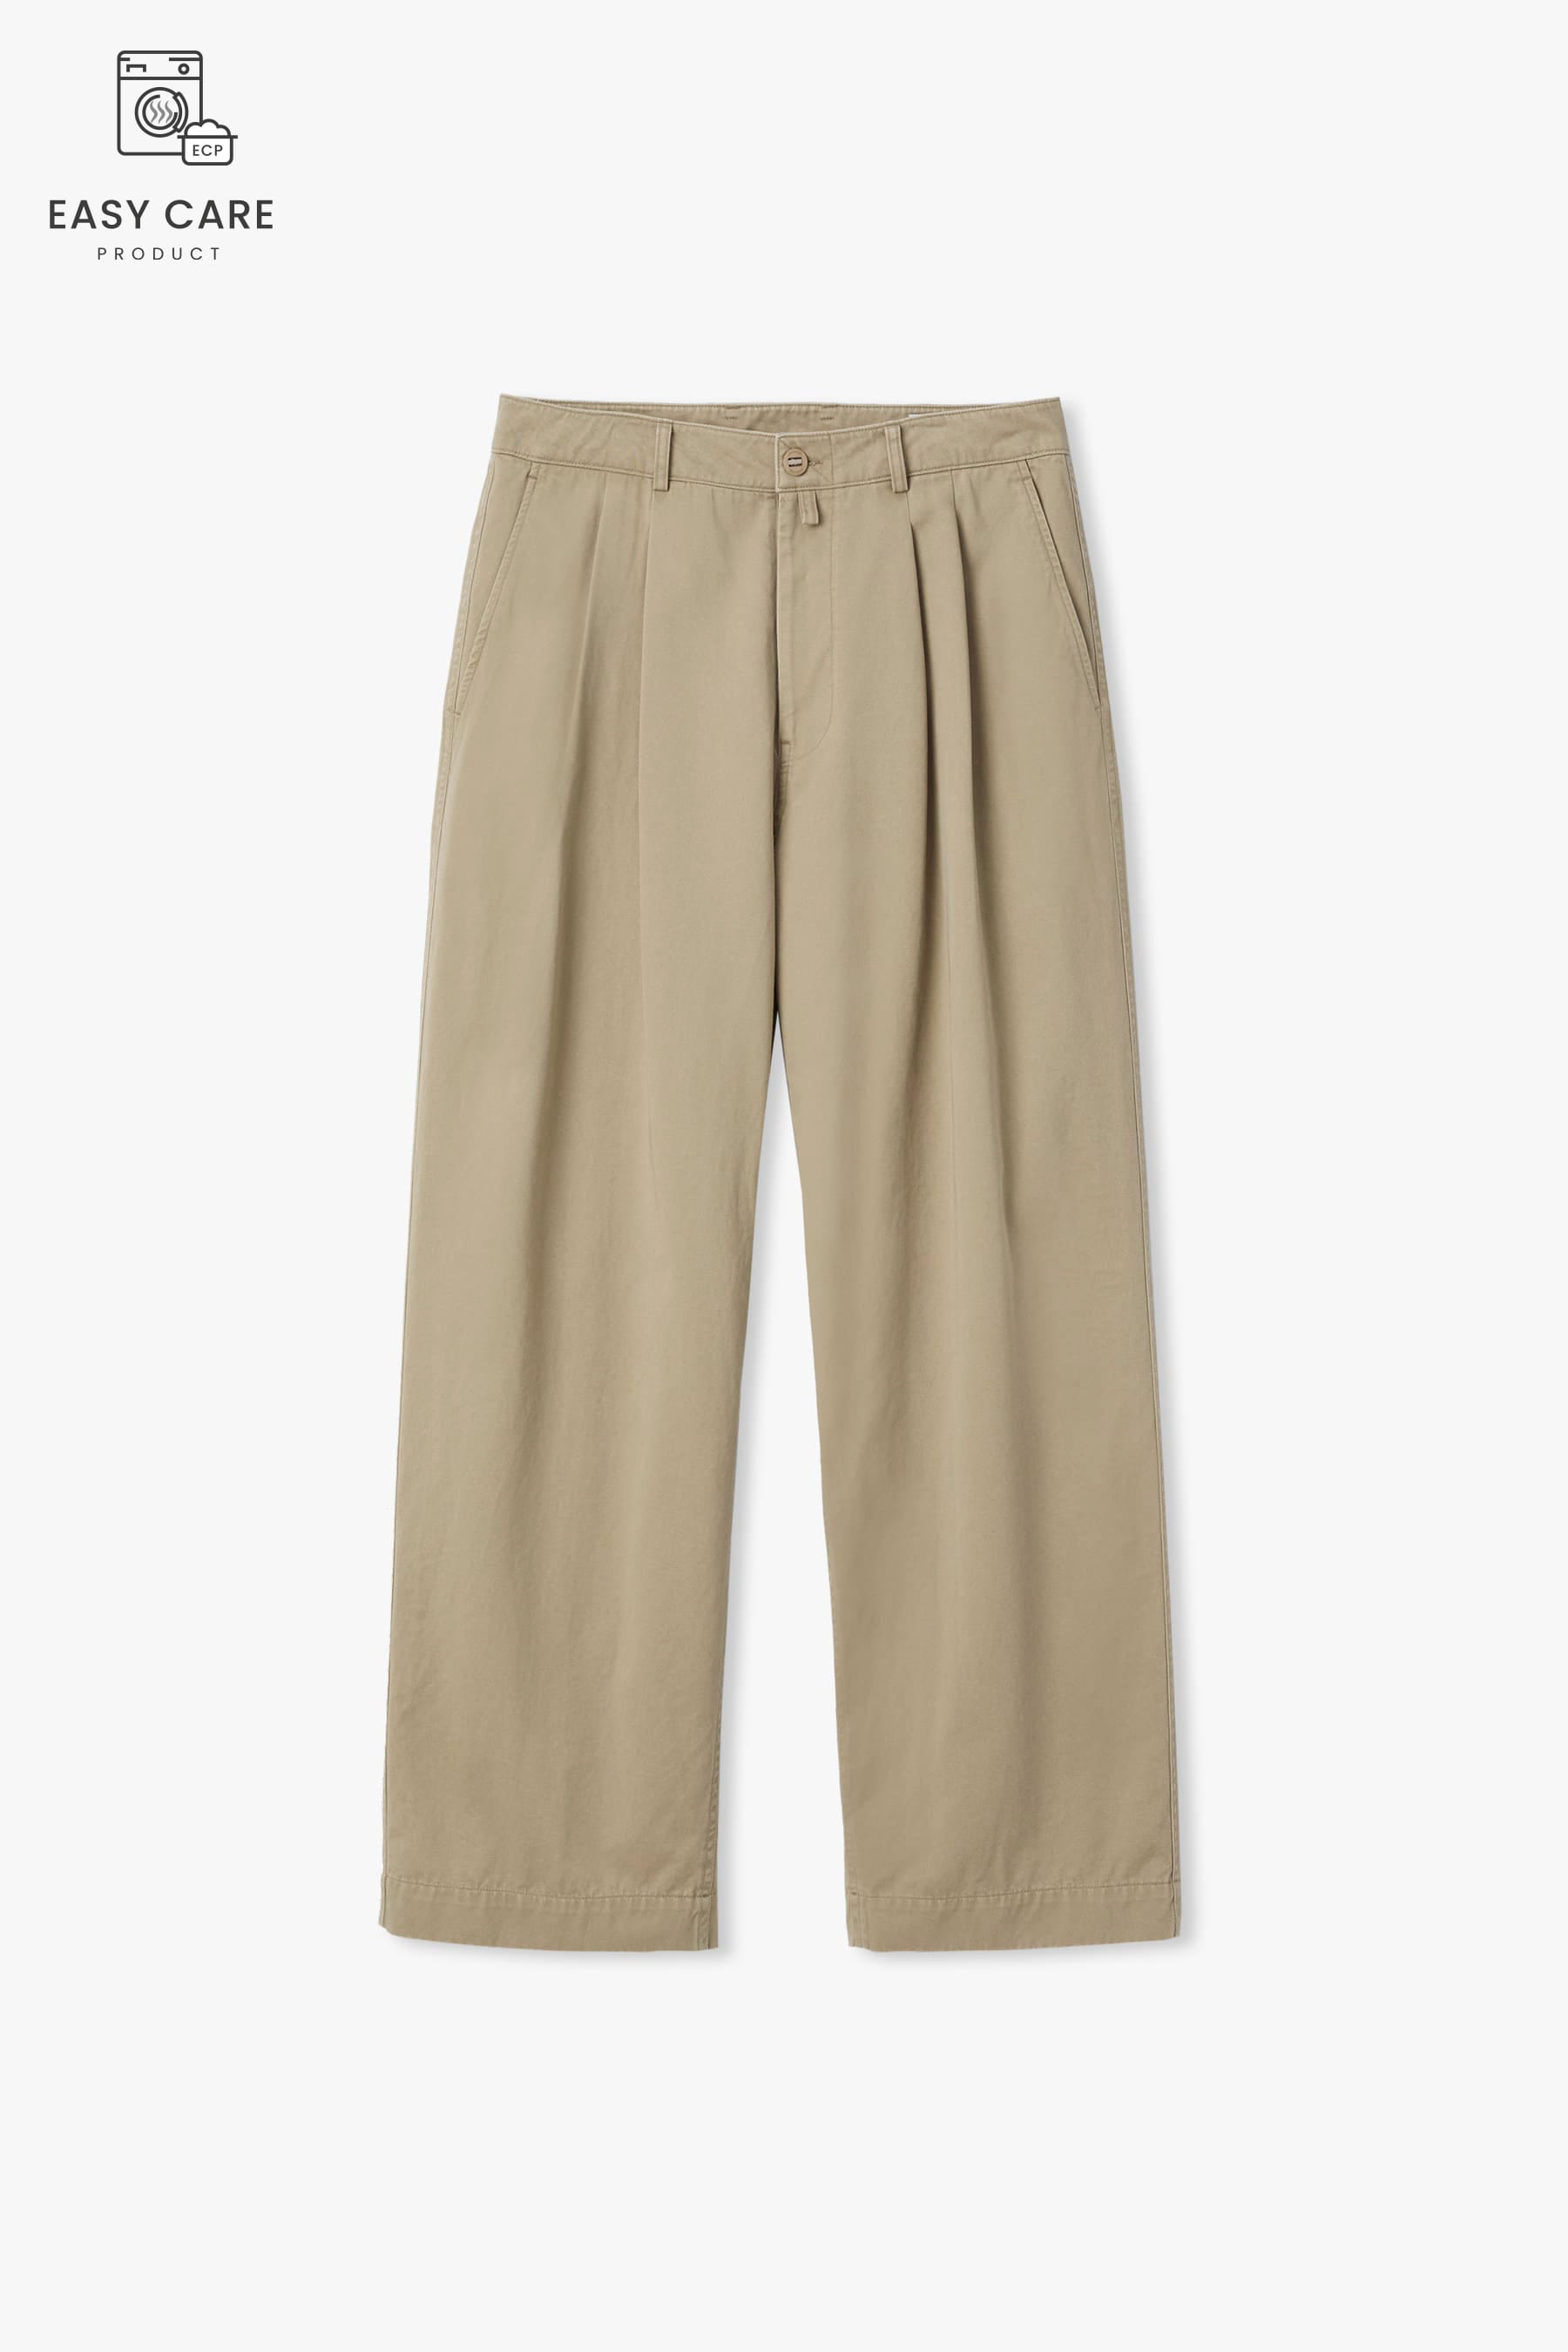 SAND BEIGE YRS Y-550 WASHED WIDE CHINO PANTS (ECP GARMENT PROCESS)